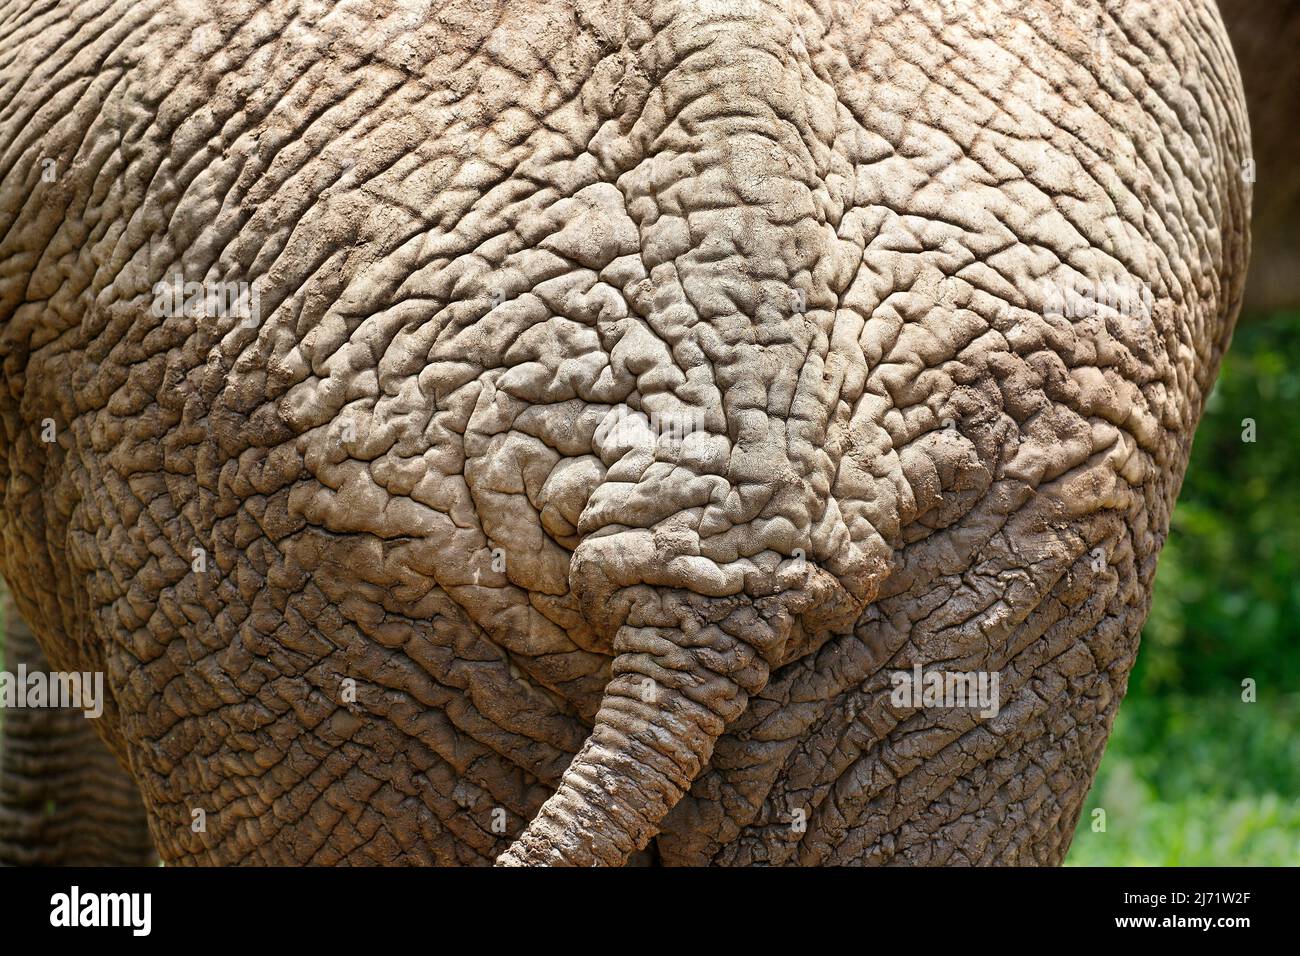 Close up of the rear end of a wild African Elephant showing the folds and texture of its thick skin Stock Photo